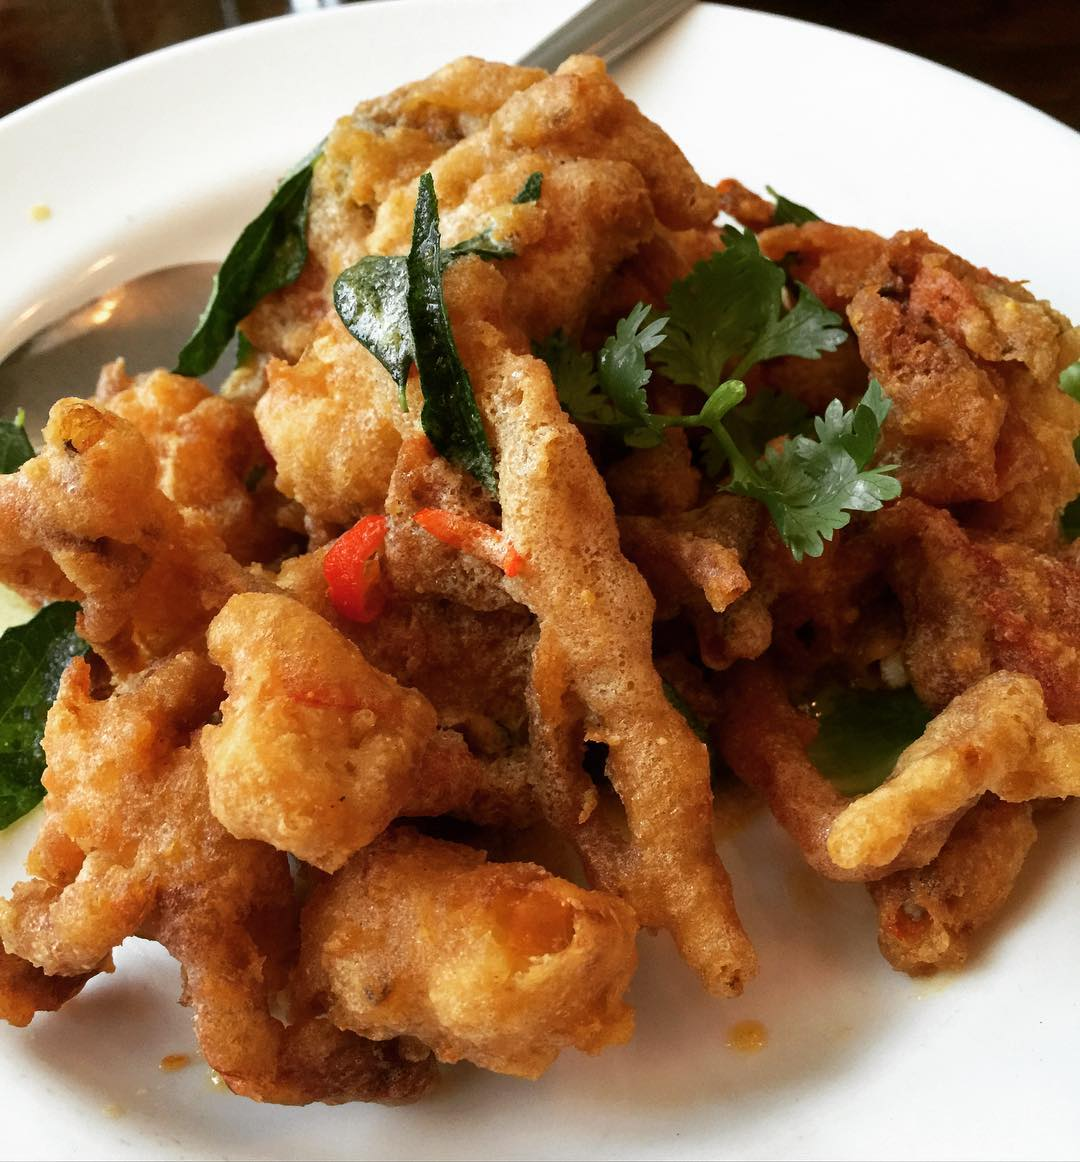 salted egg soft shell crab dish from beaulieu seafood restaurant 